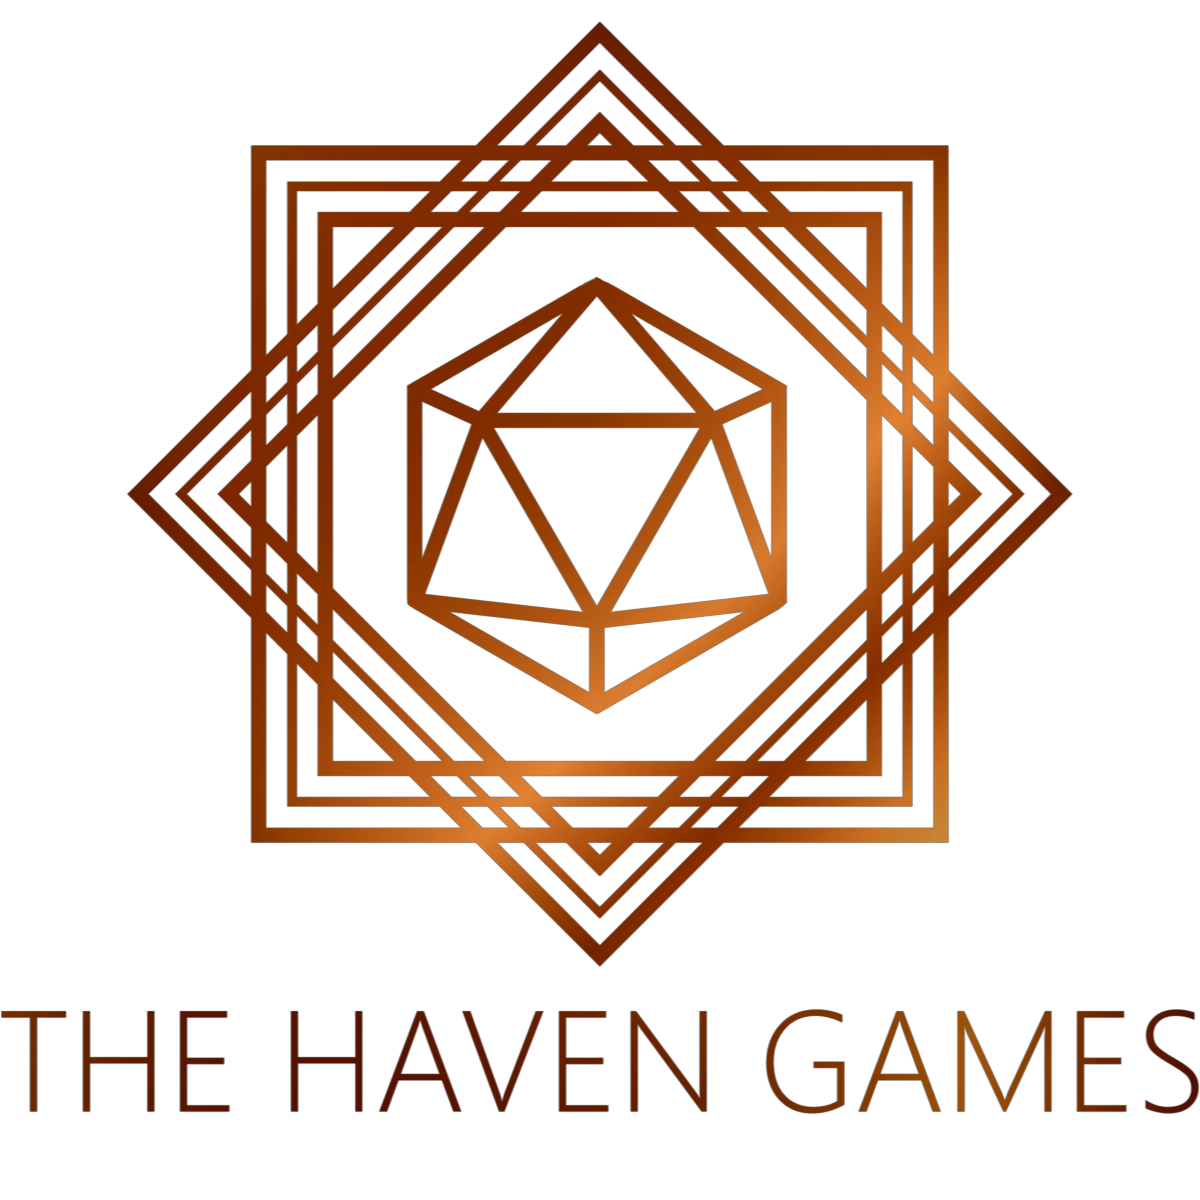 The Haven Games